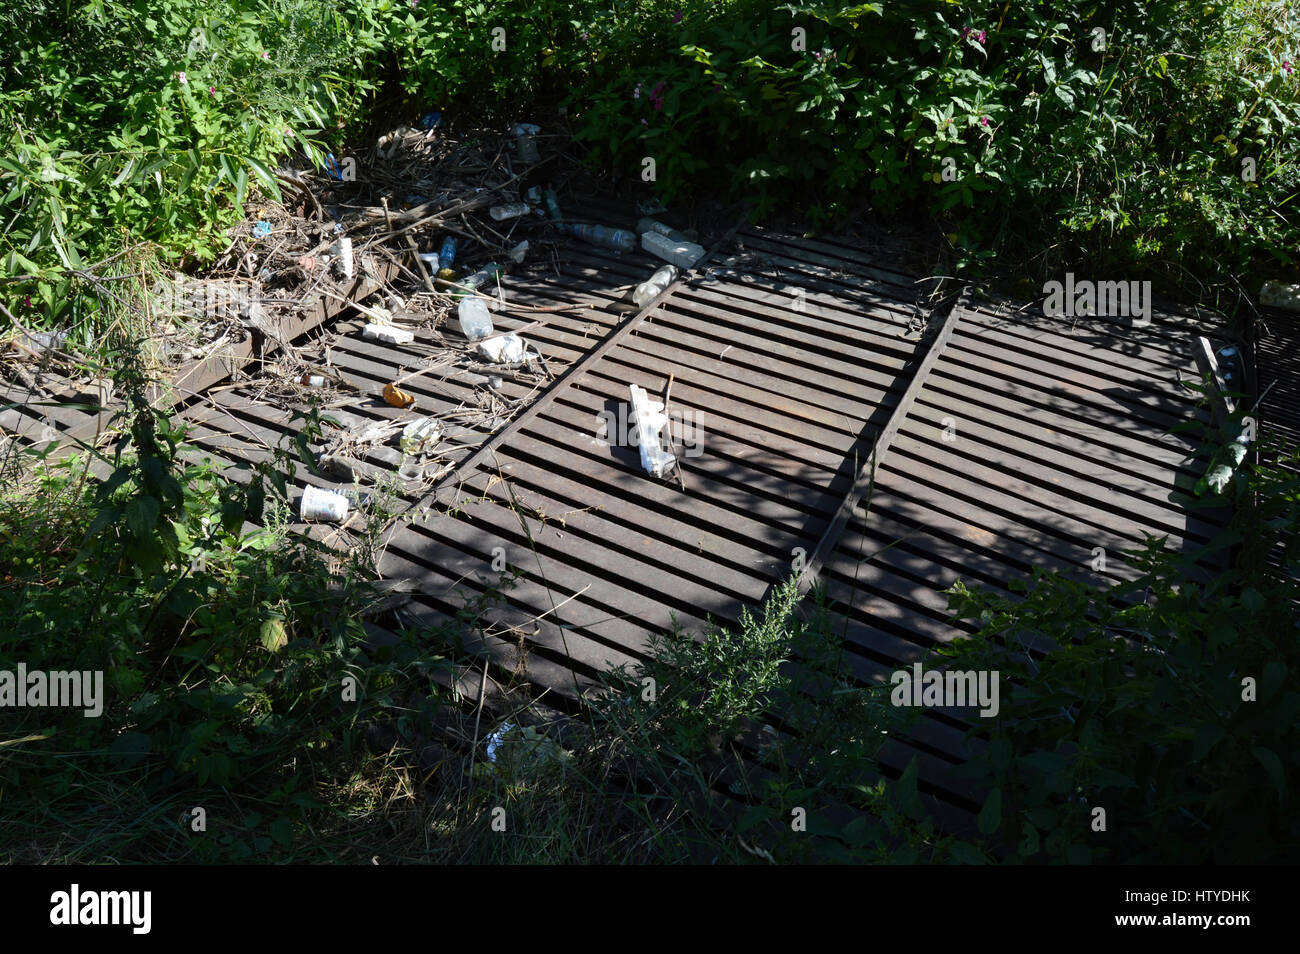 KOVROV, RUSSIA - JULY 25, 2015: Drainage ditch littered with debris Stock Photo